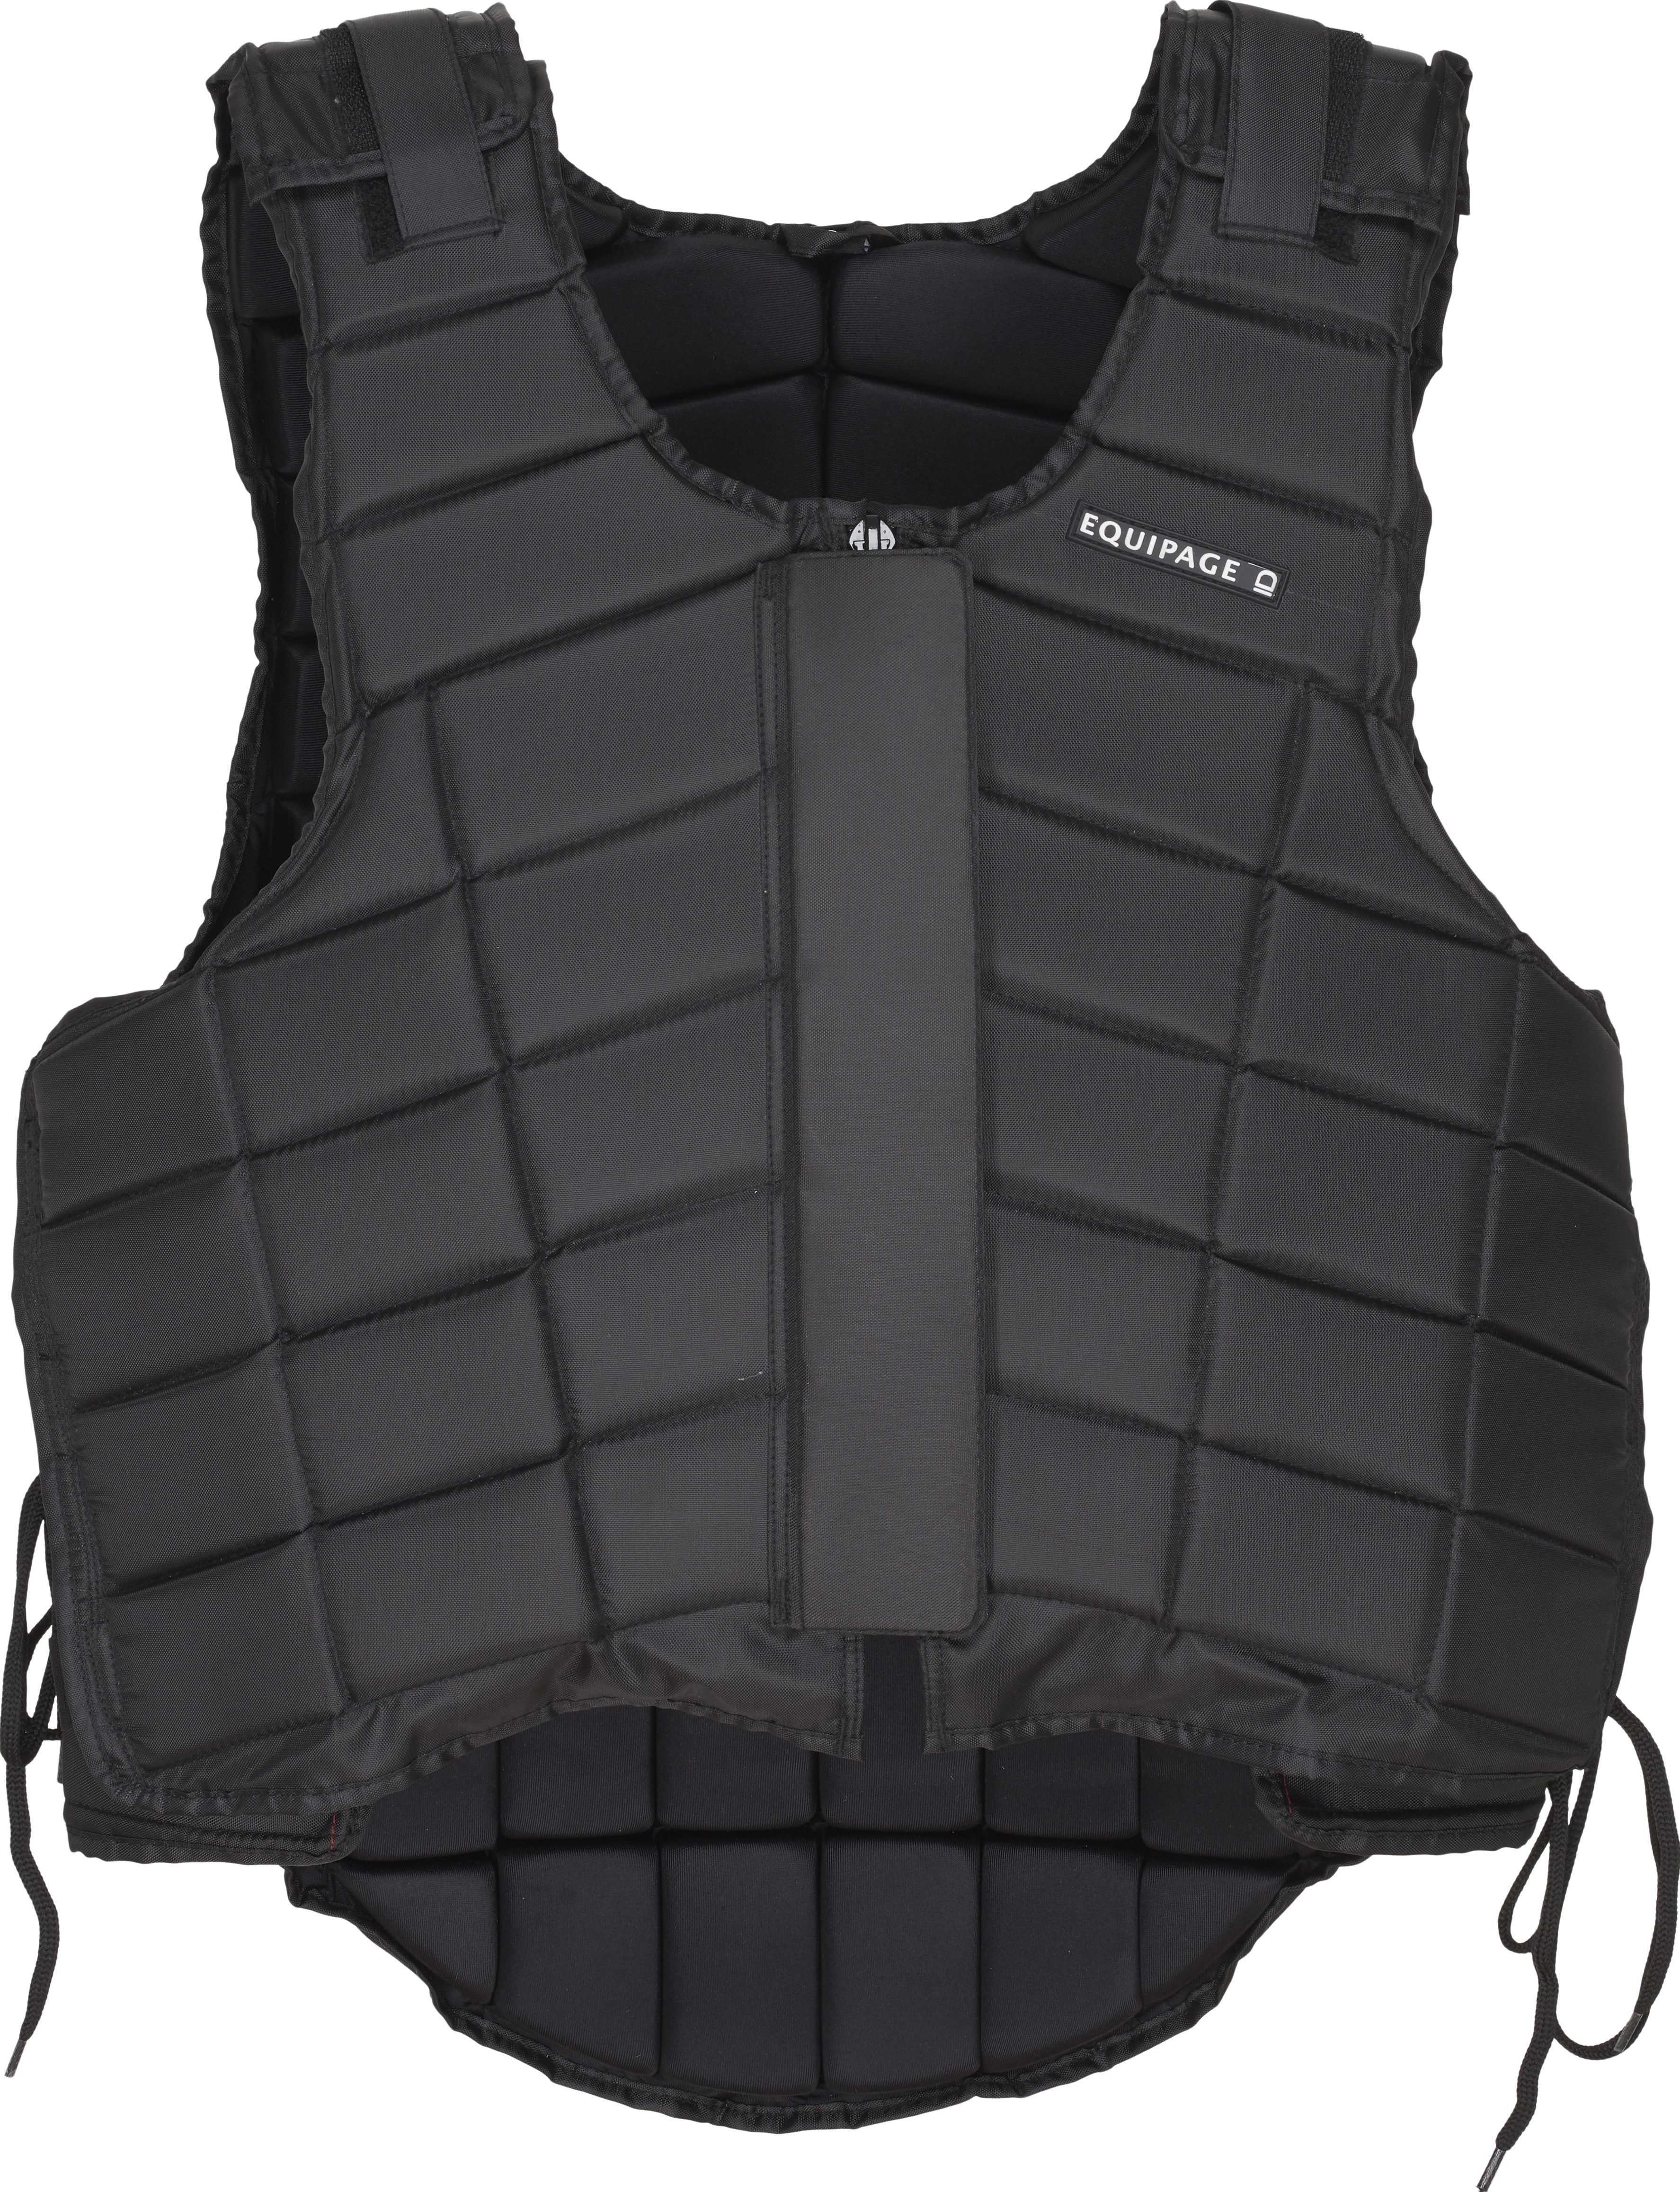 Equipage Rider Body Protector - Black (S)